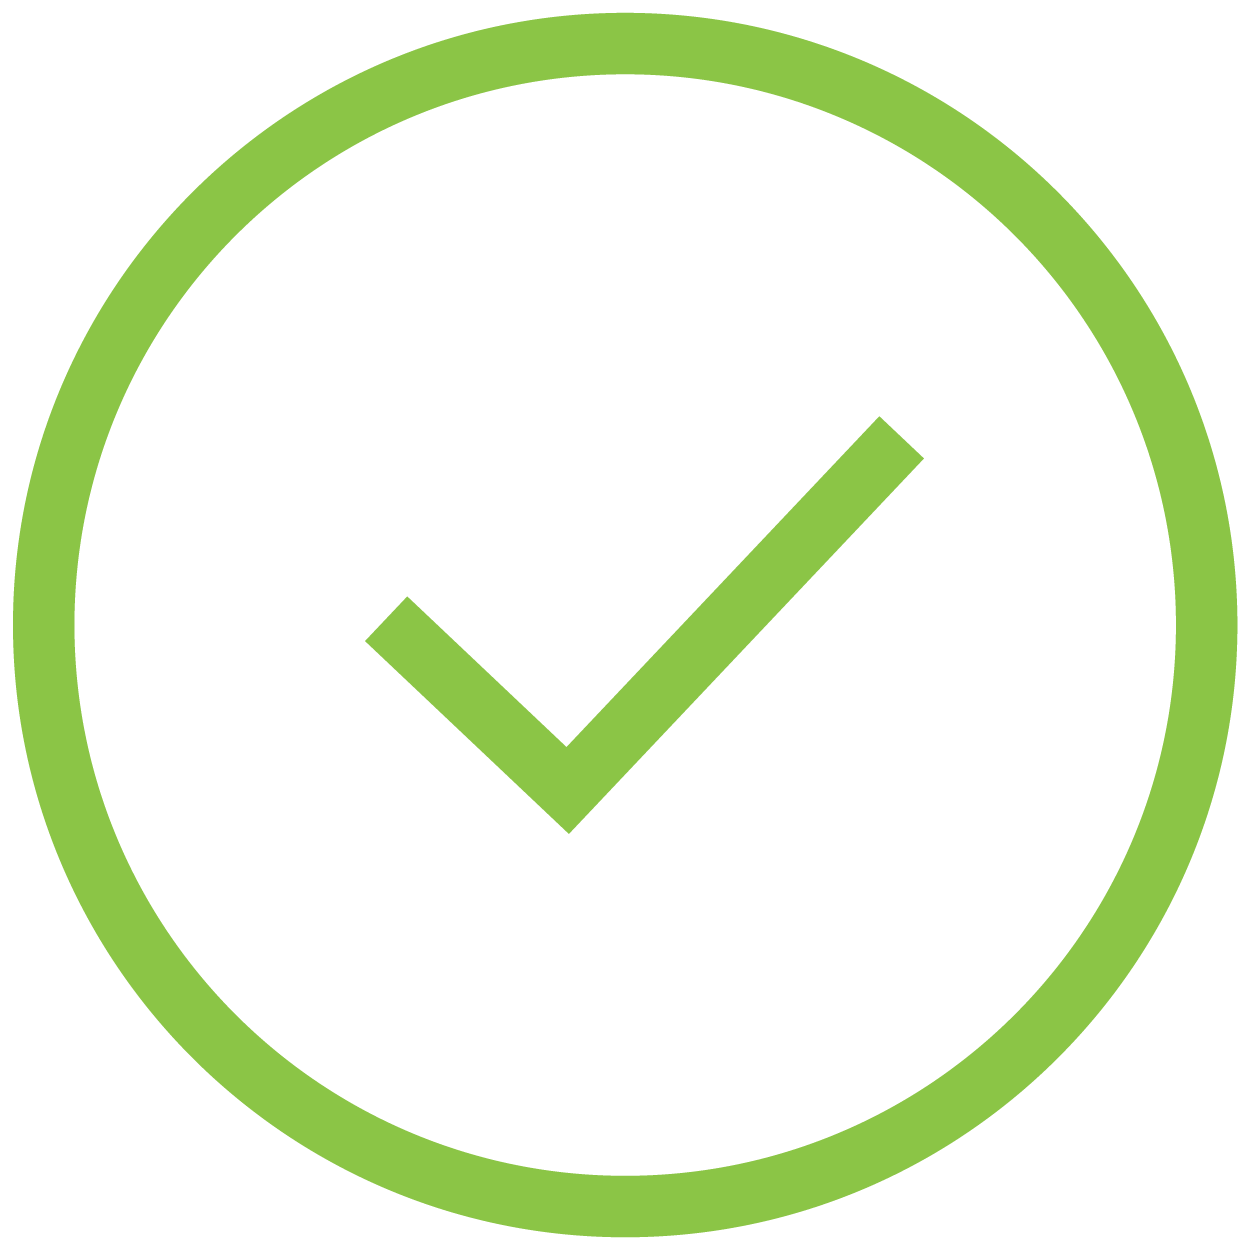 Light green icon of the outline of a circle with a checkmark in the center.